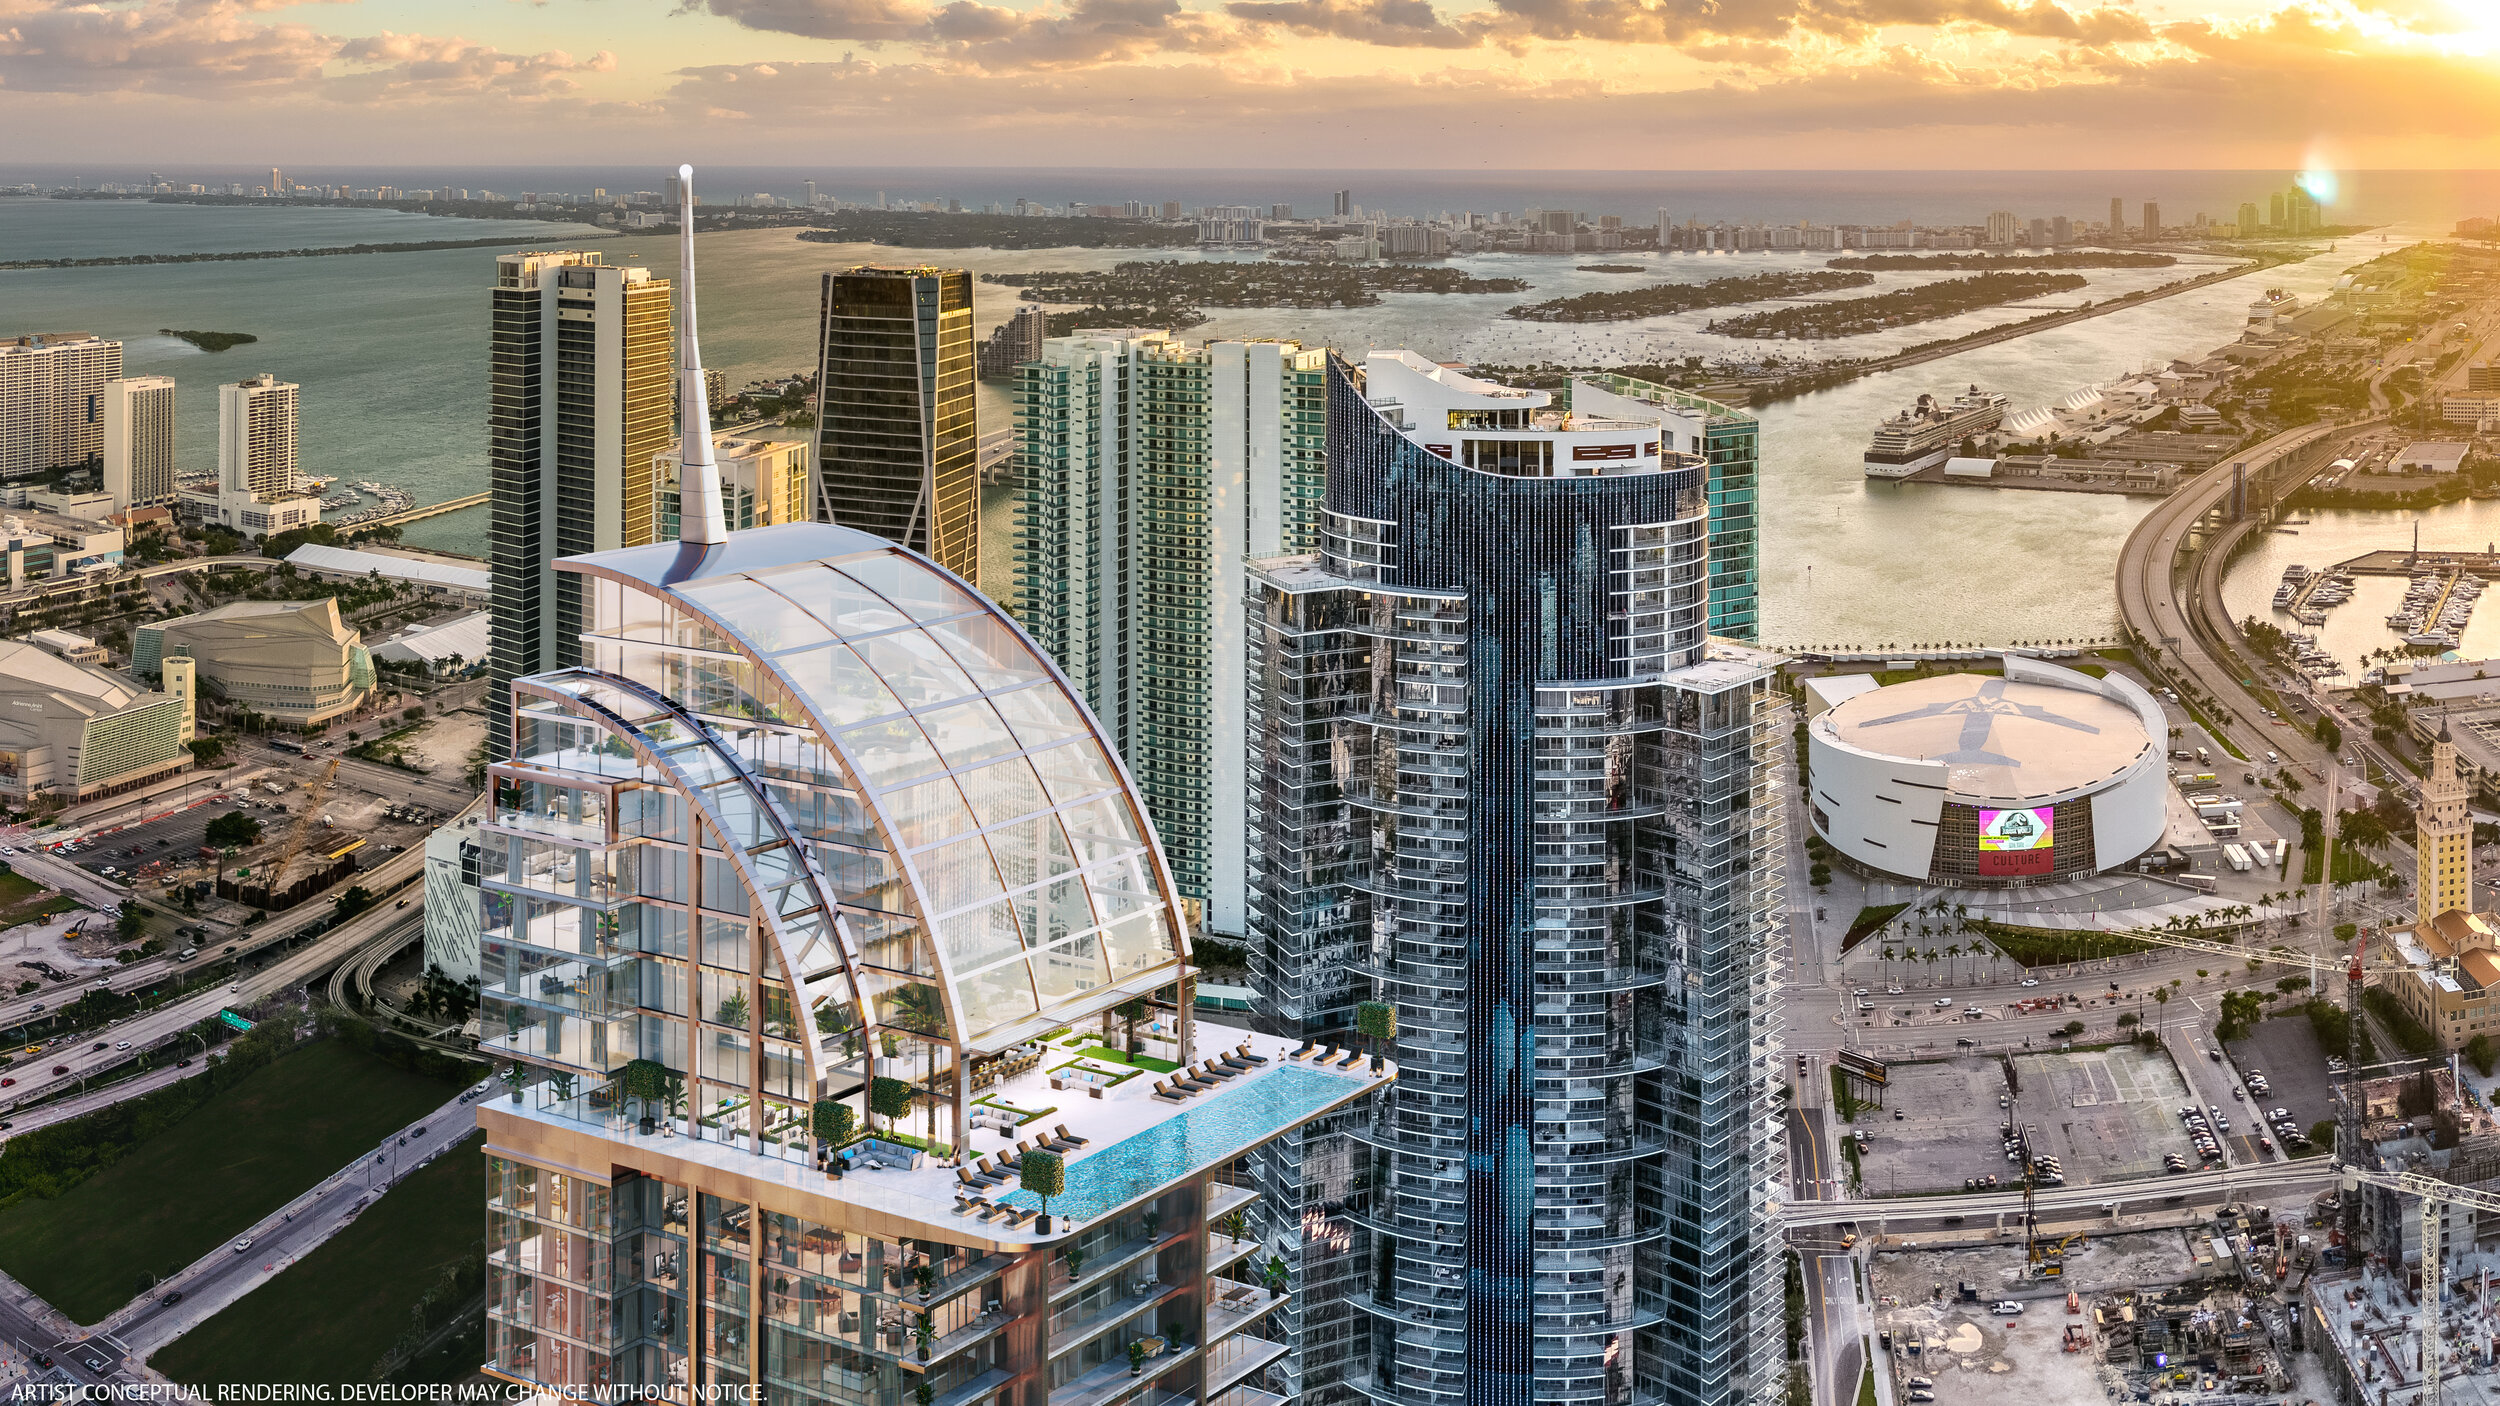 Legacy Hotel and Residences, America's First 'Covid-Conscious' Mixed-Use Tower Breaks Ground In Downtown Miami